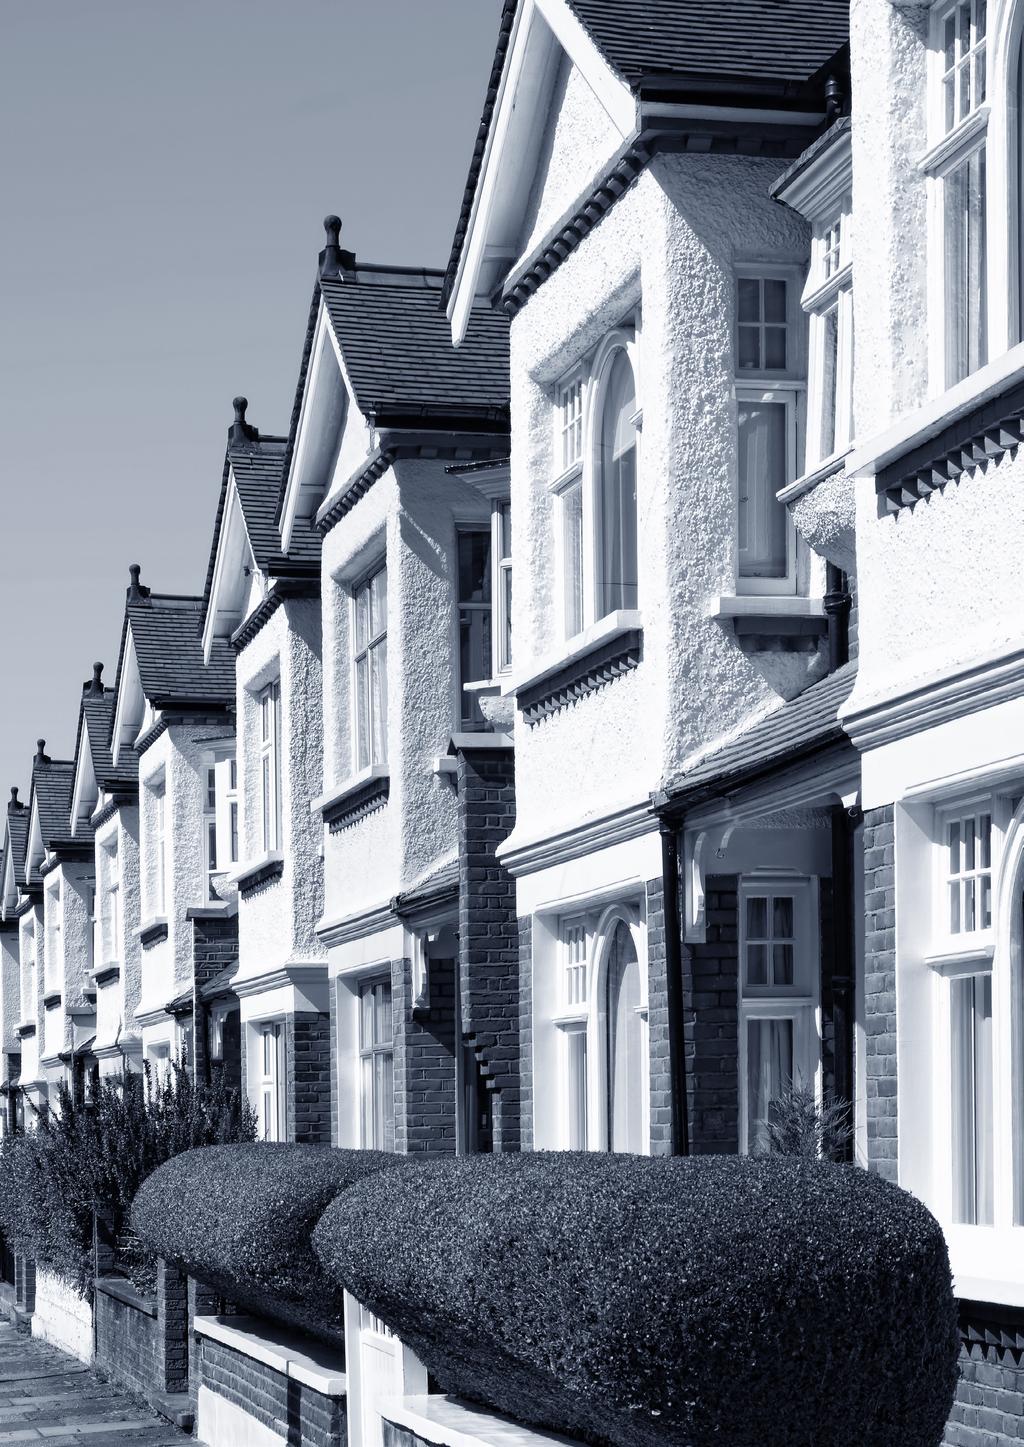 FOREWORD The quality of service that conveyancers provide can make or break a deal for estate agents.